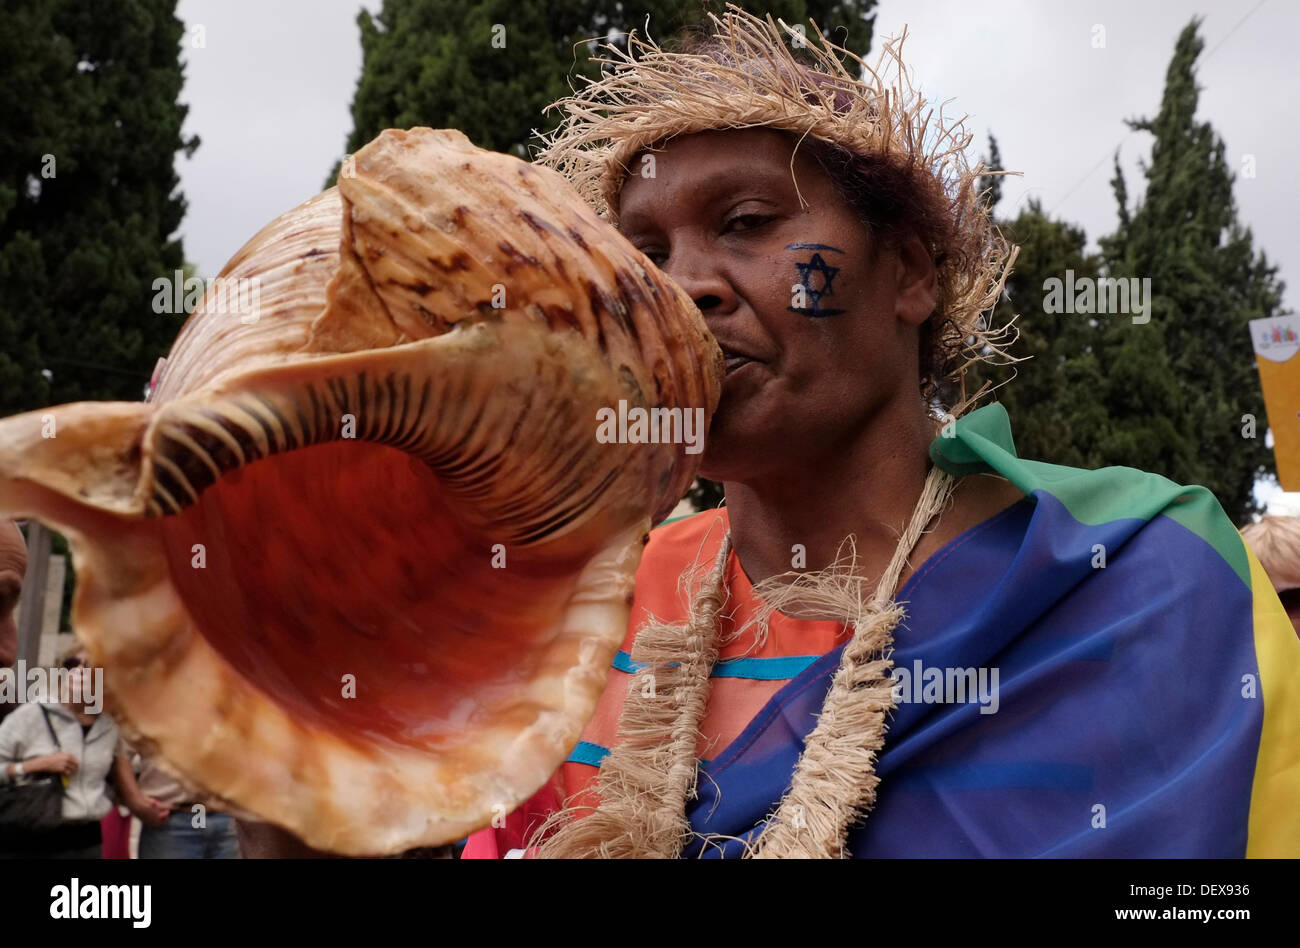 An Evangelical Christian from the Pacific islands blows a huge seashell  during the annual Jerusalem's Sukkot Parade in Israel. Thousands throng to Jerusalem to participate in the annual Sukkot march with participants from cities and towns all over Israel including evangelical Christians and Israel supporters from abroad. Stock Photo